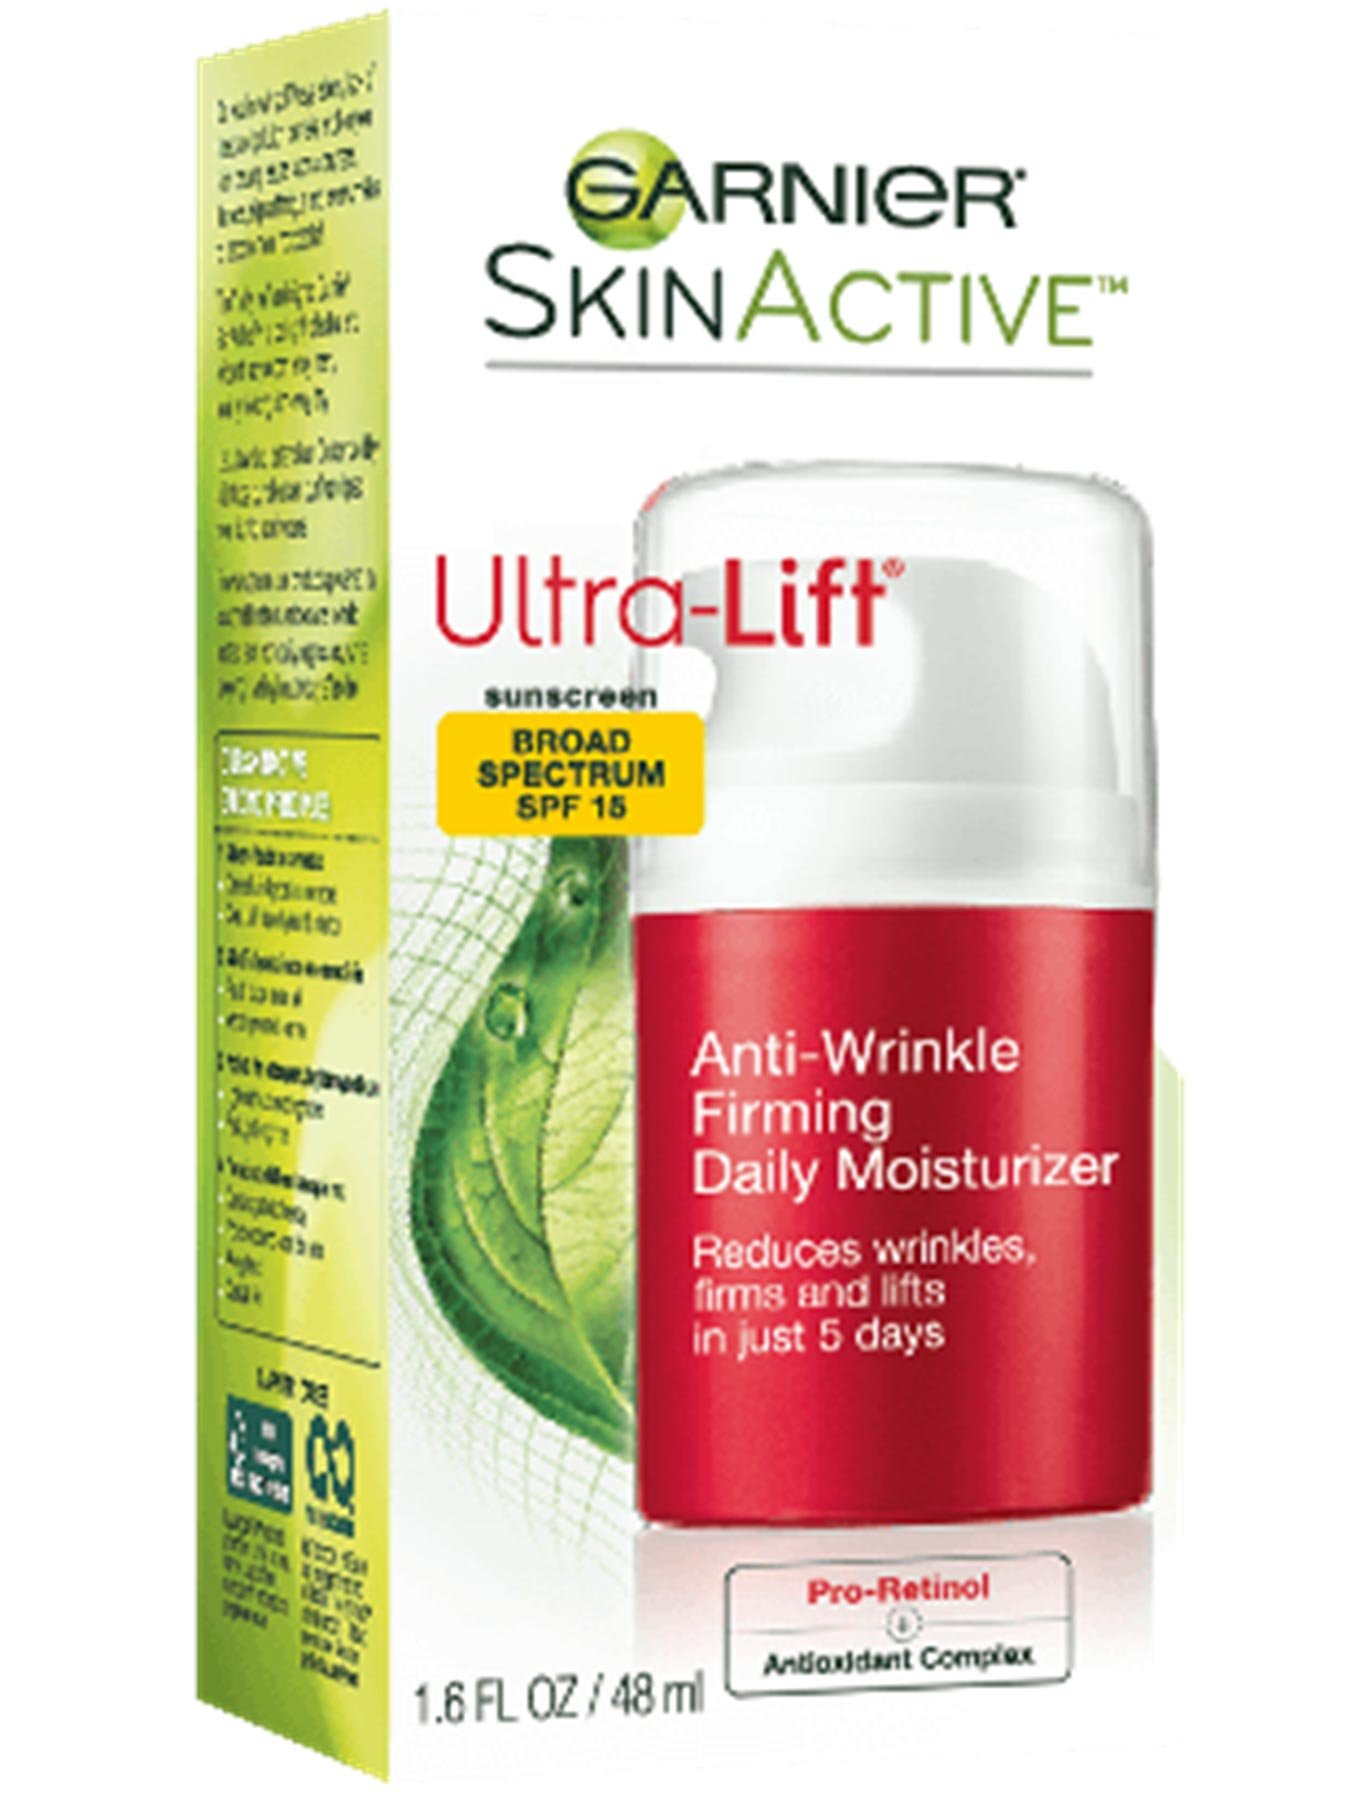 Front view of Ultra-Lift Anti-Wrinkle Daily Firming Moisturizer box.